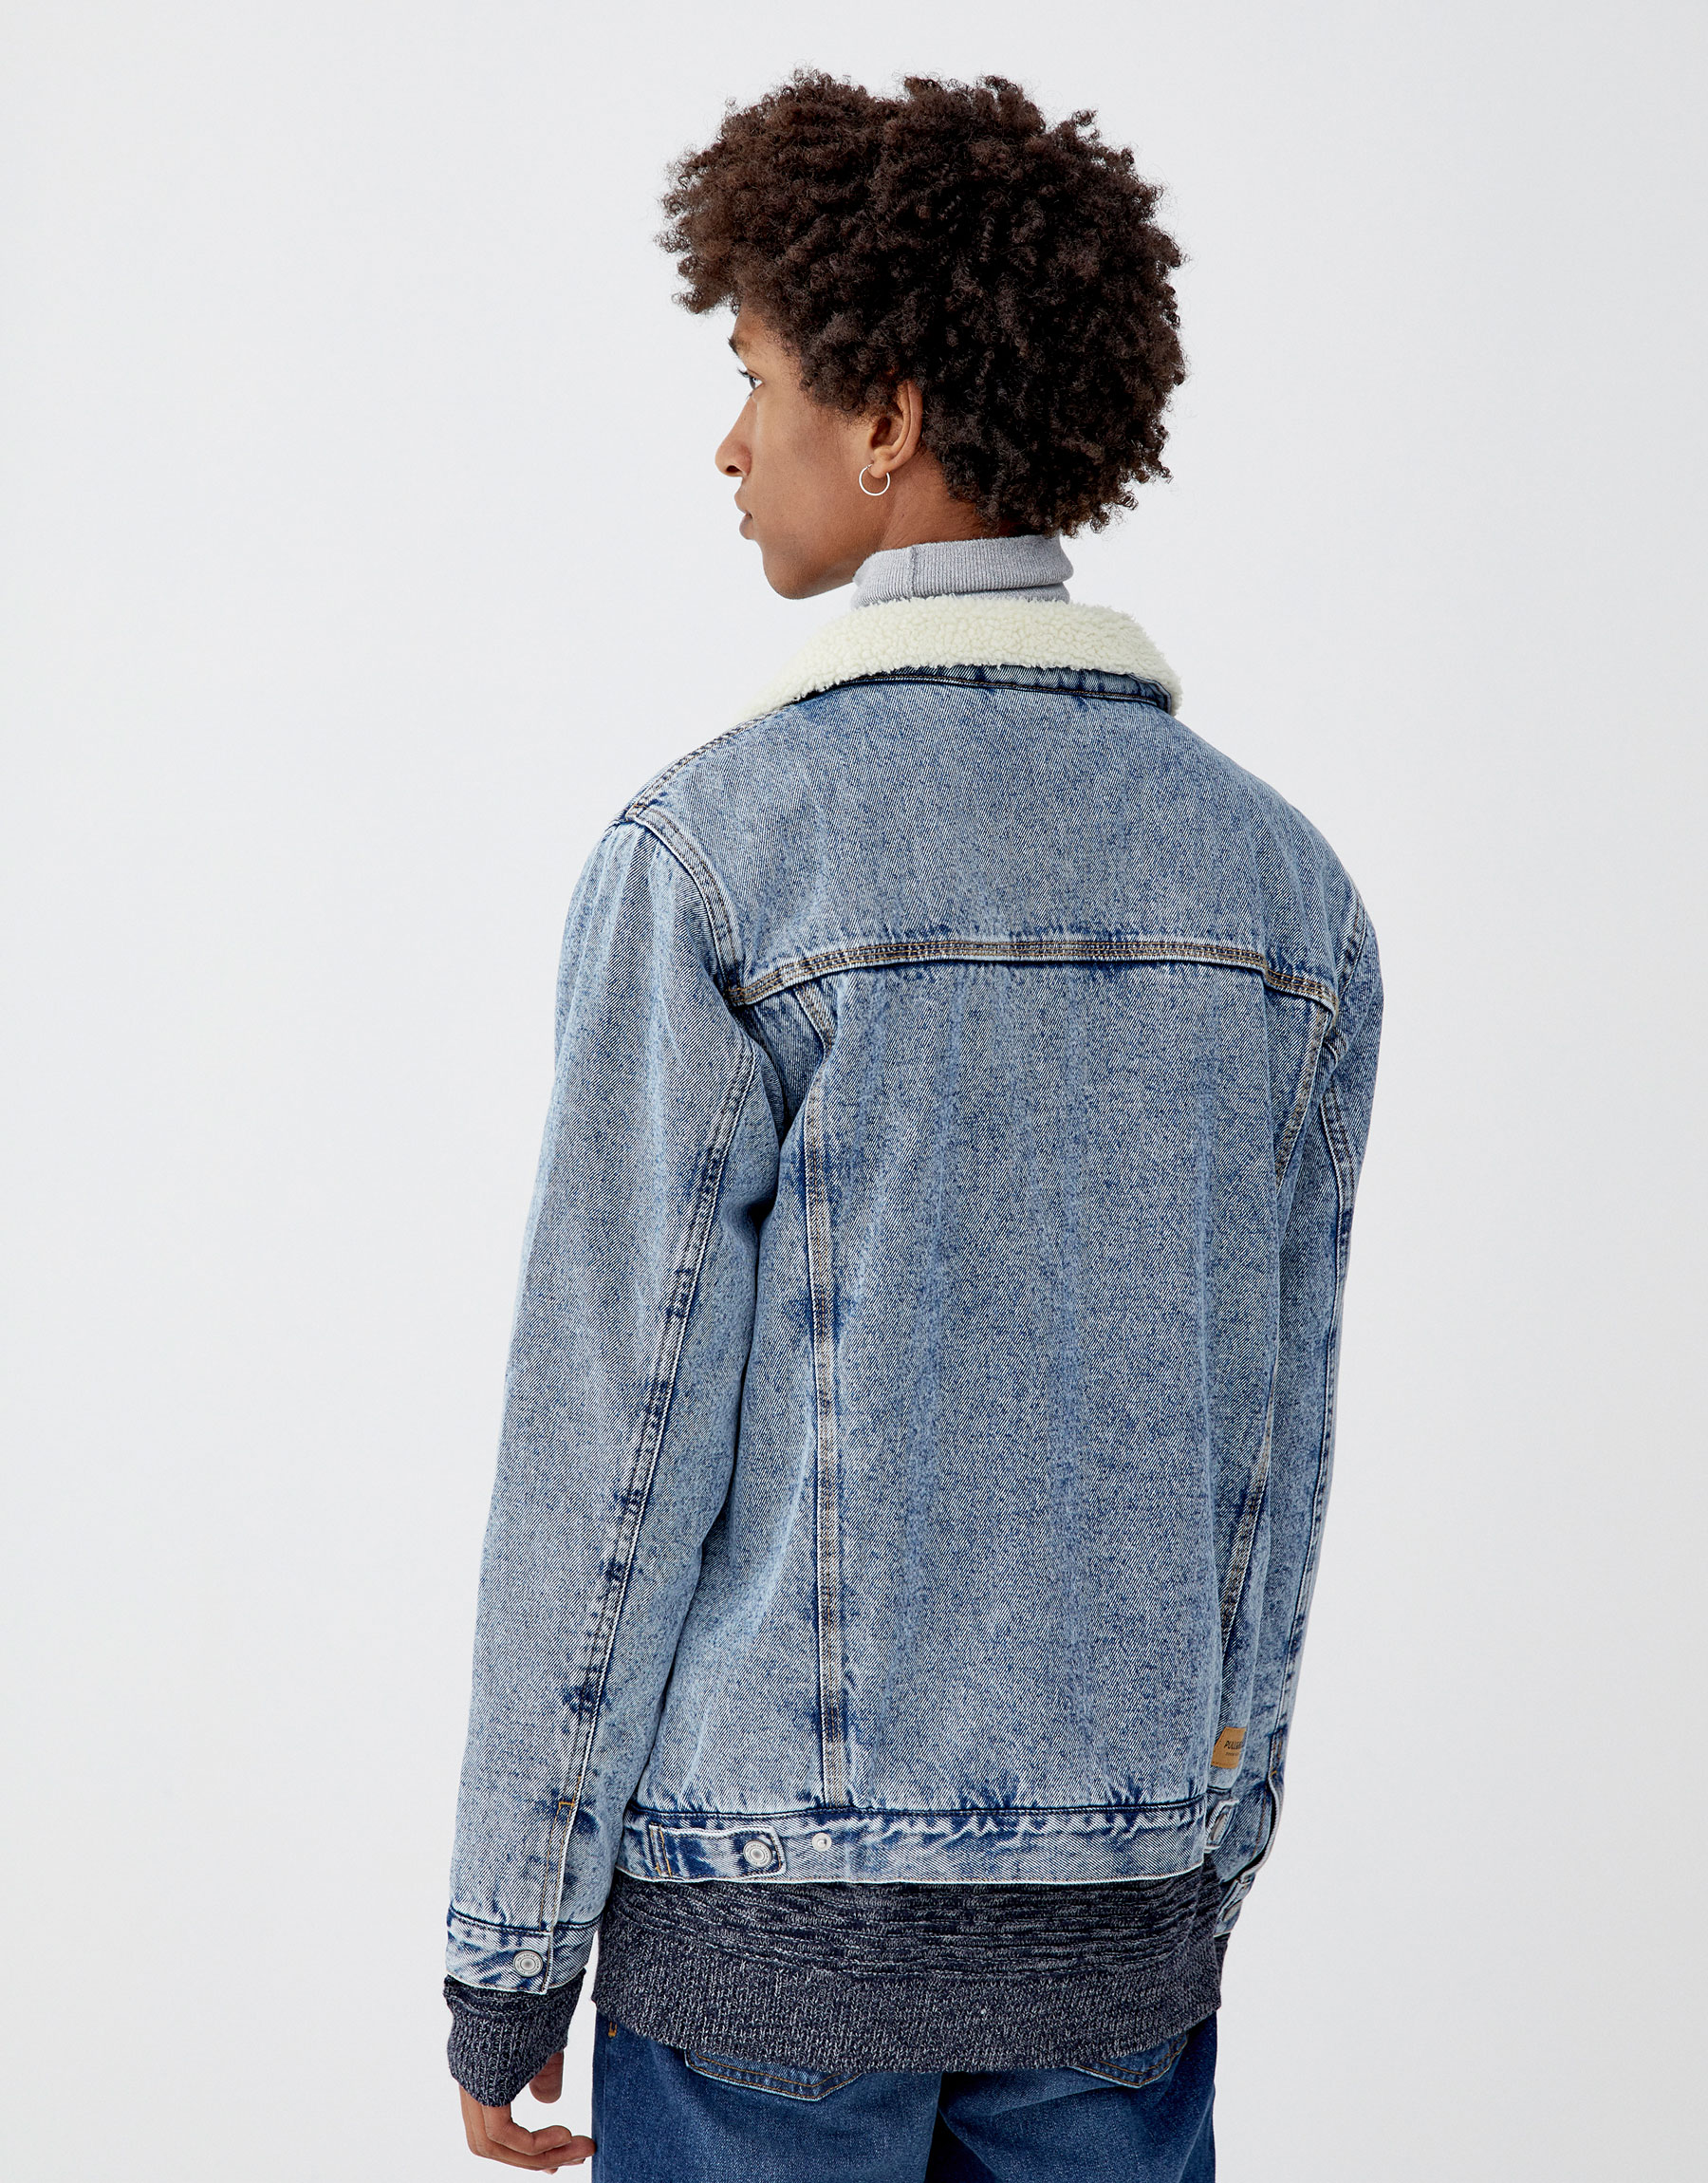 Pull & Bear Denim jacket with a fleece collar at £49.99 | love the brands